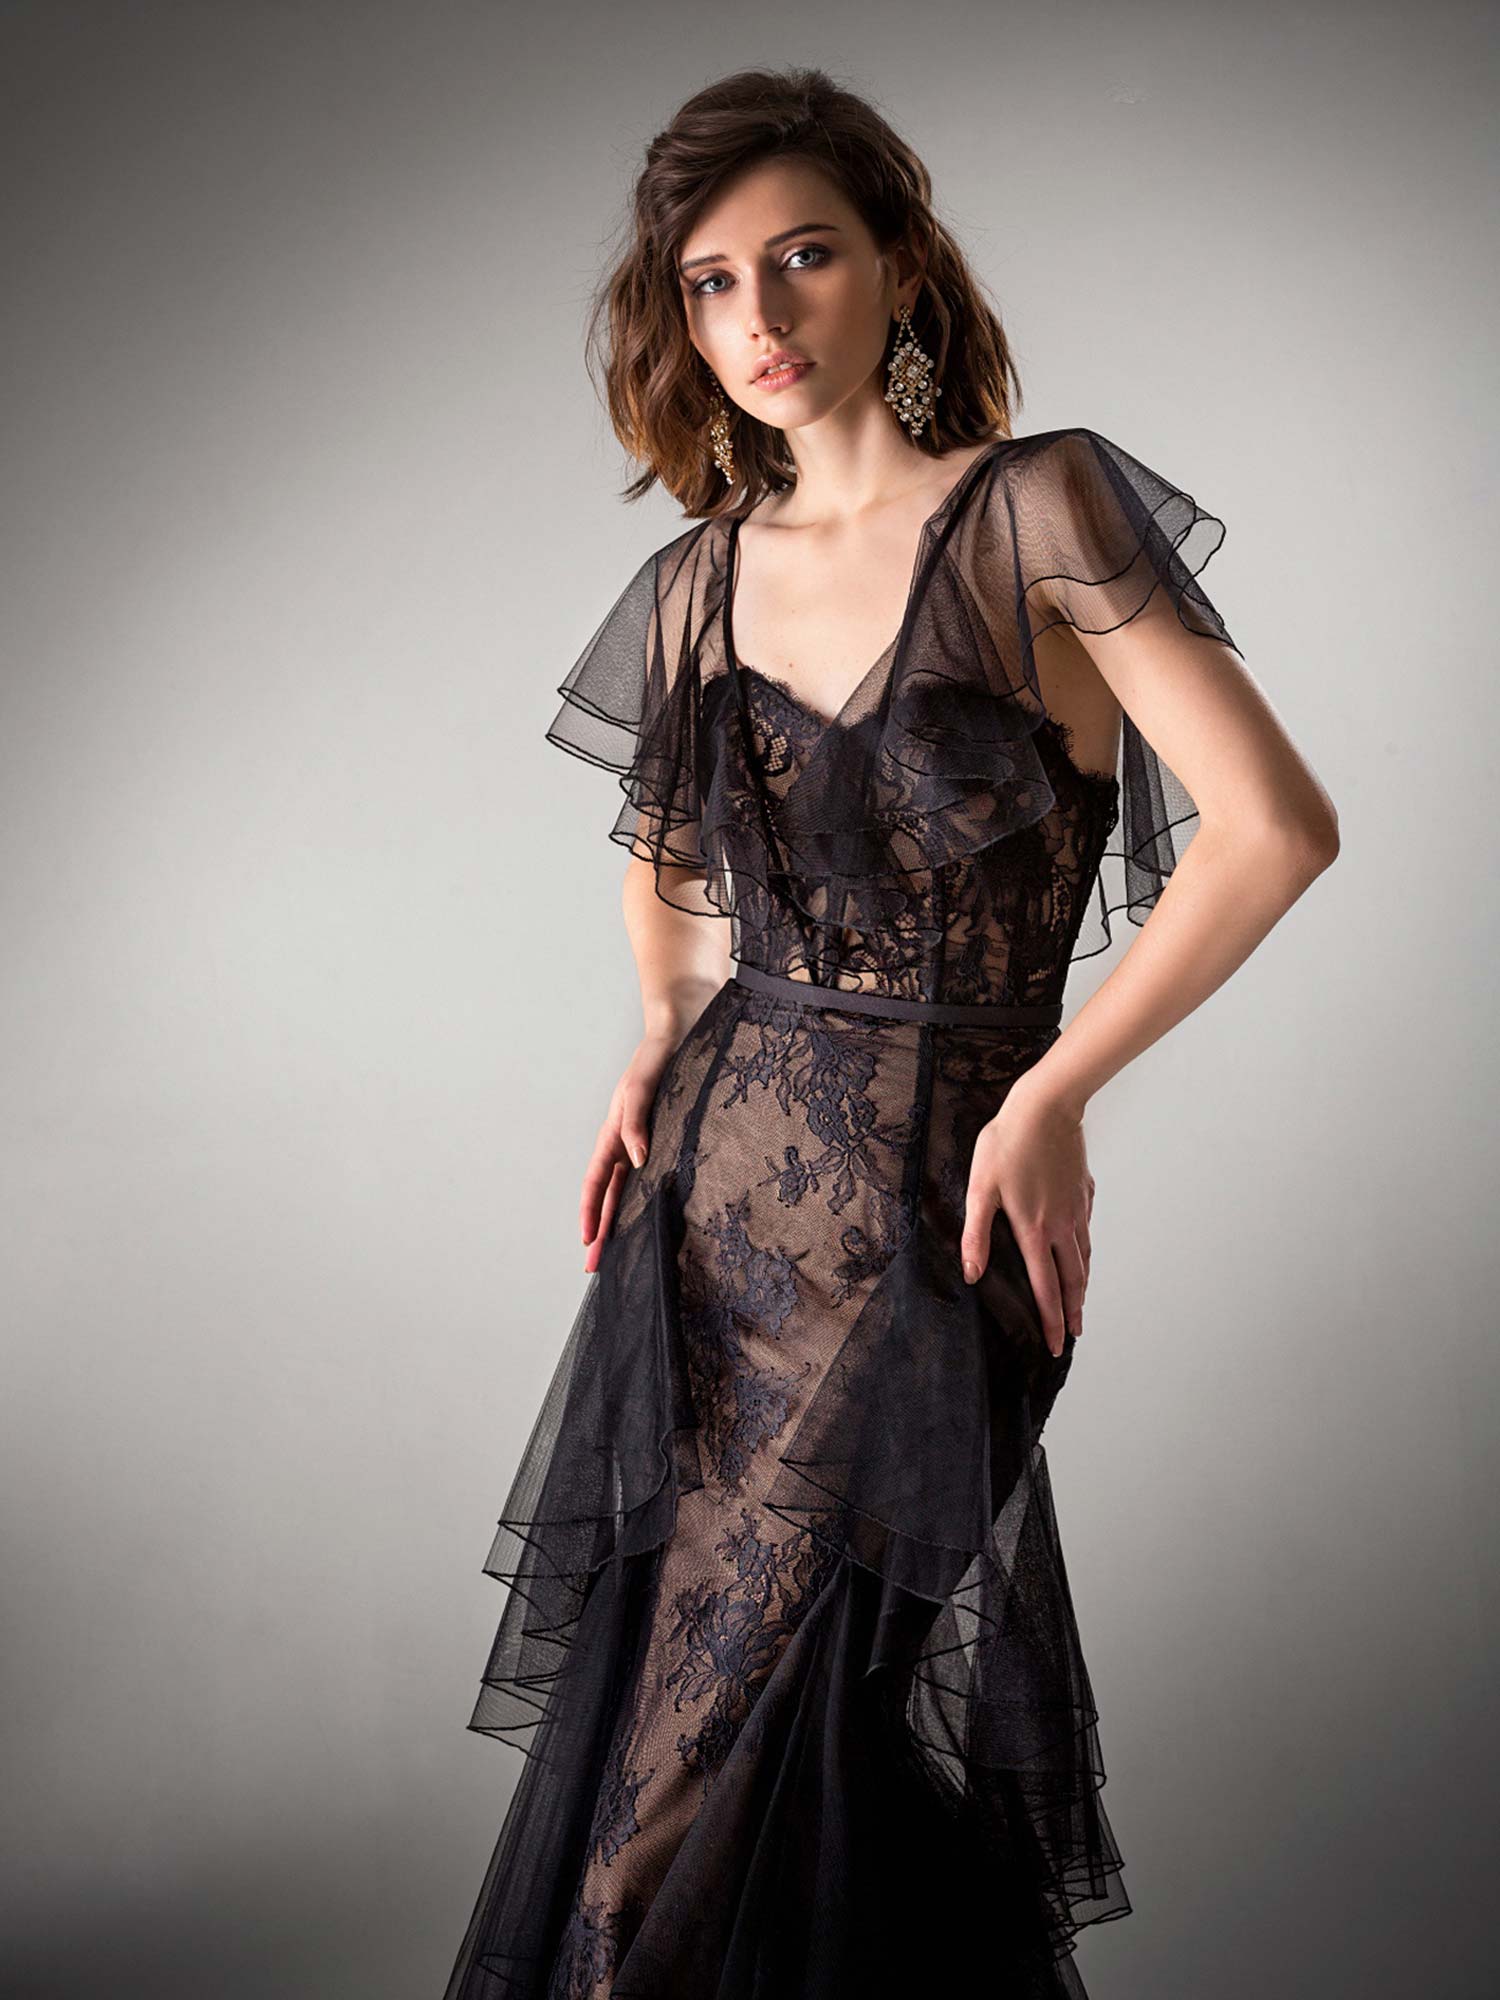 Fitted evening gown with ruffle details